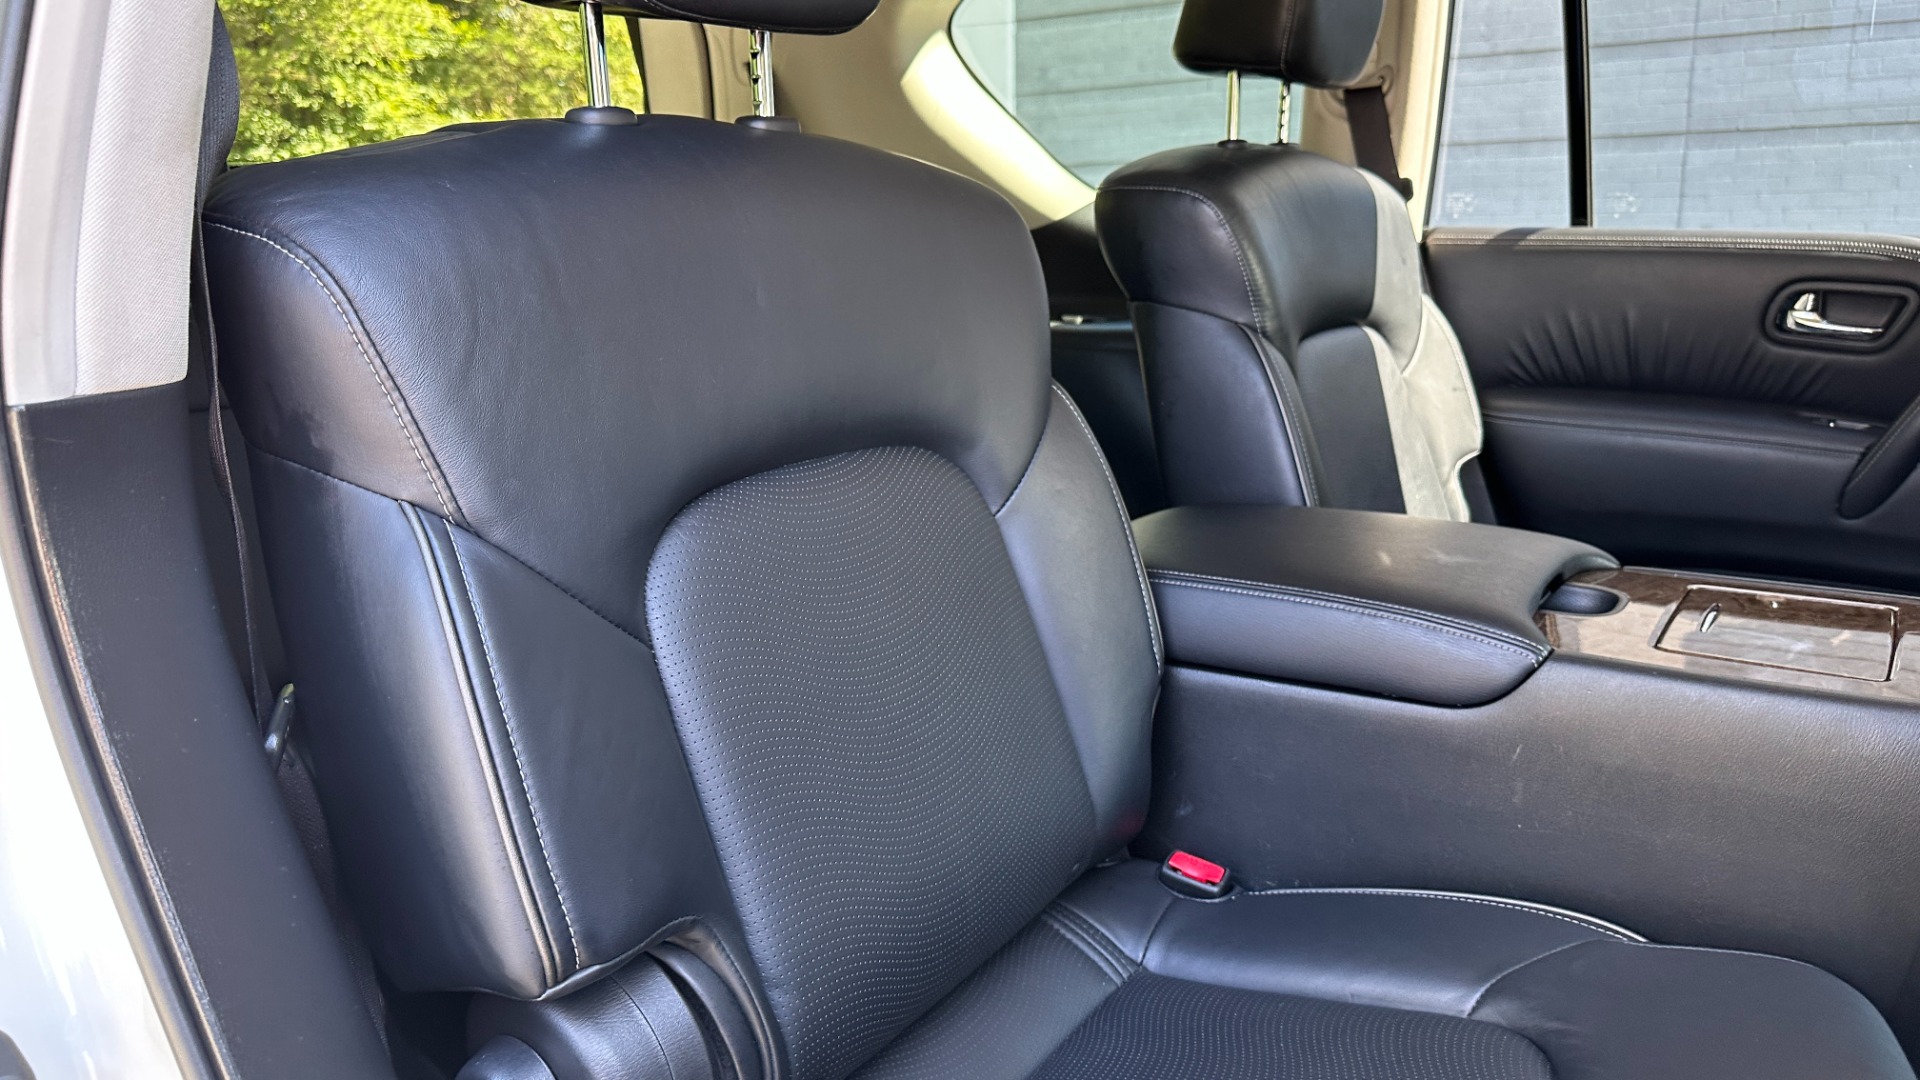 Used 2017 INFINITI QX80 SIGNATURE EDITION / 3 ROW SEATING / NAV / LEATHER for sale $25,995 at Formula Imports in Charlotte NC 28227 33